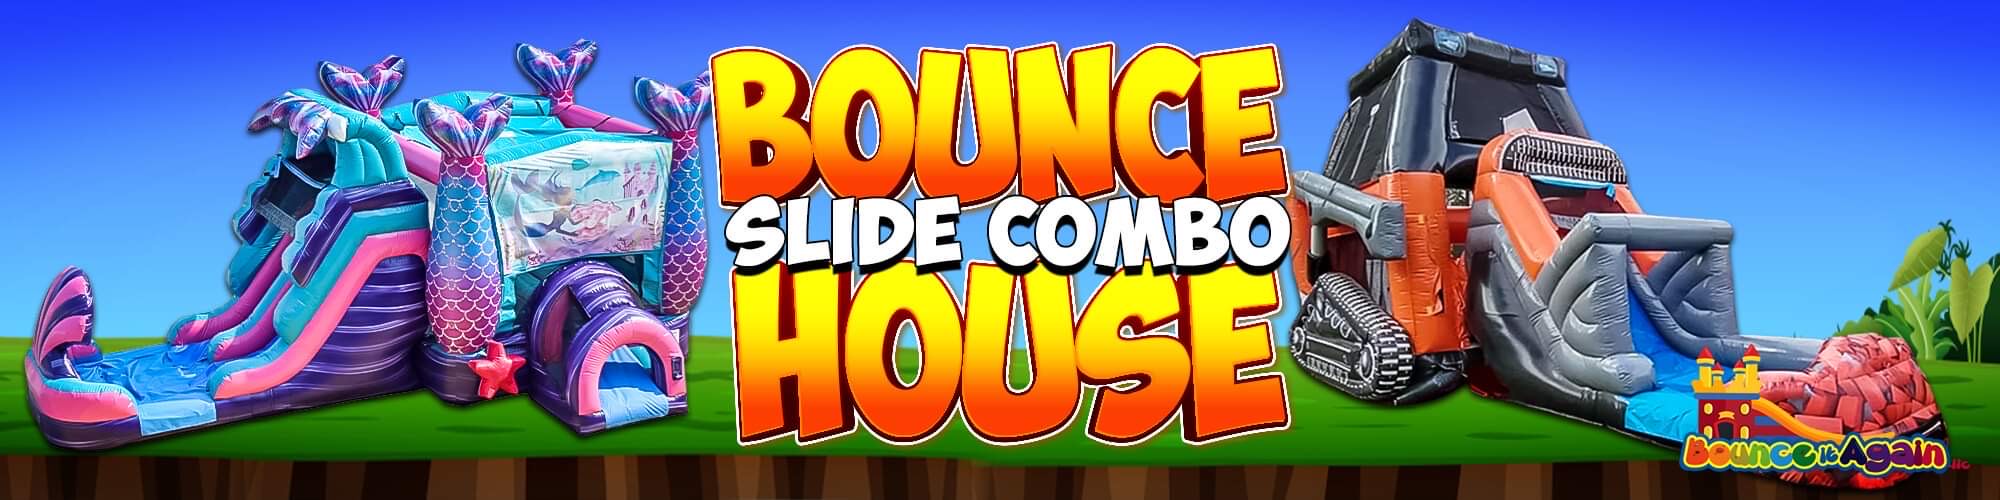 Bounce House Rentals in Bartow, FL